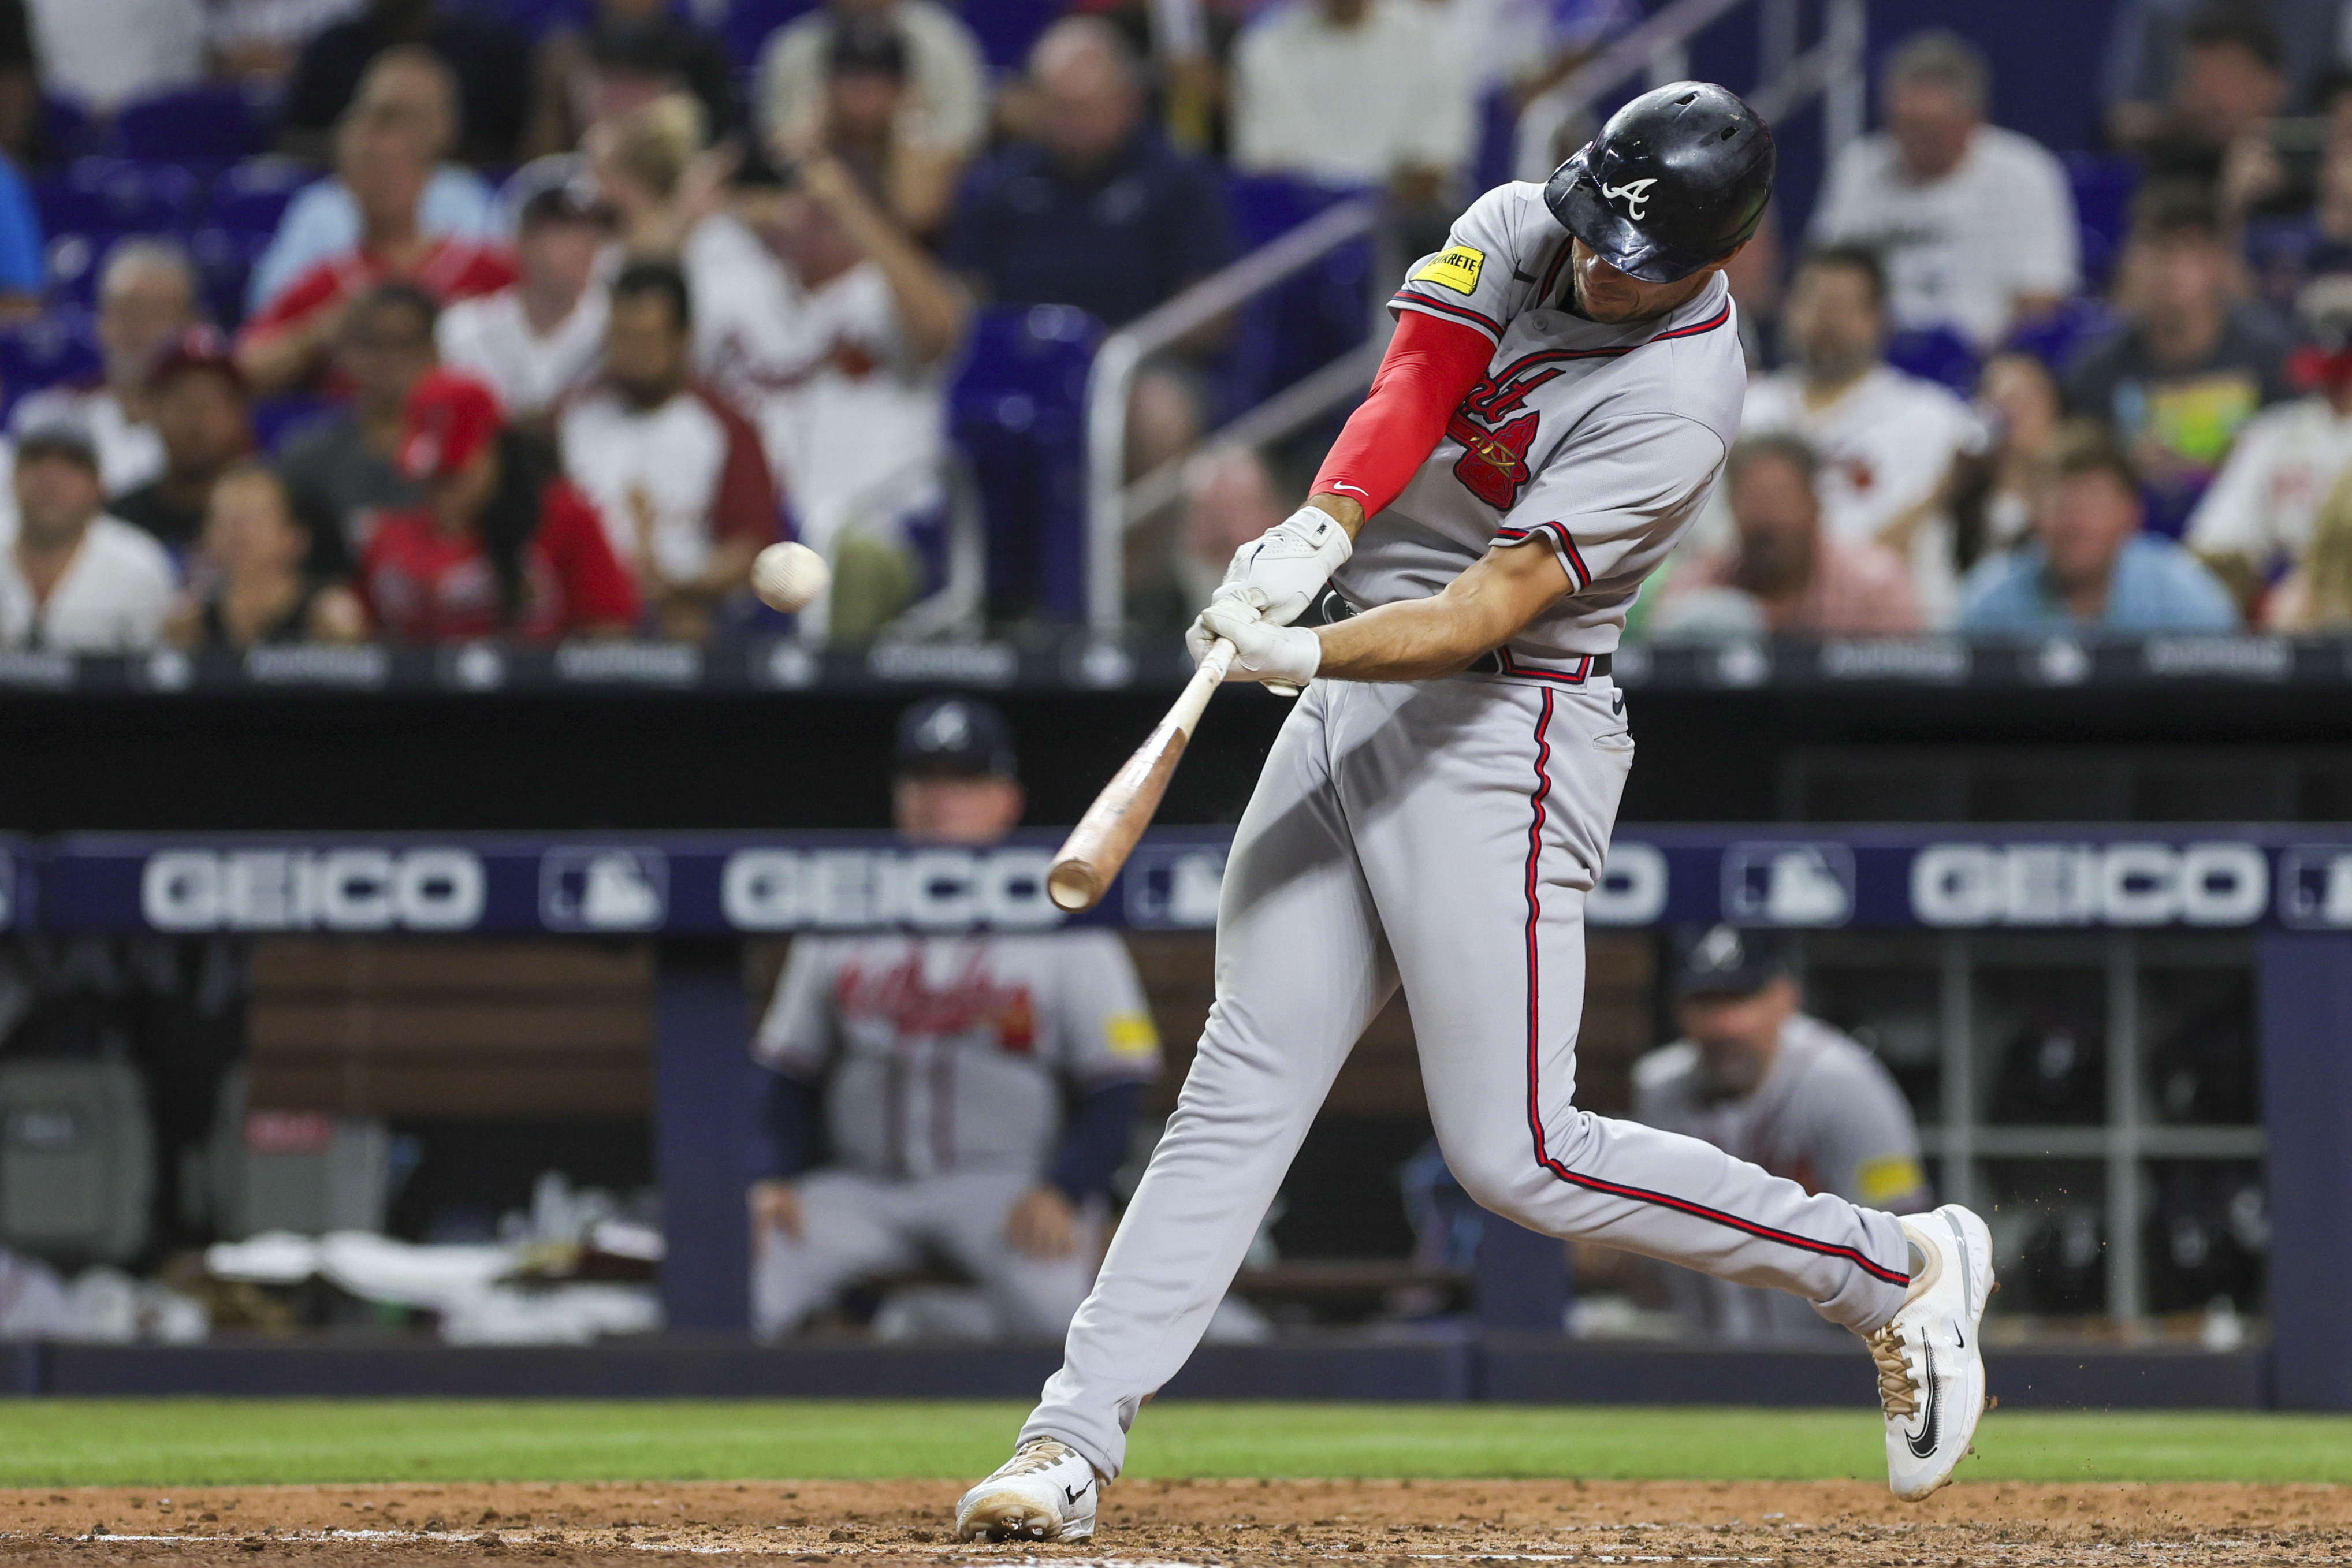 Eighth-inning home run deluge for Marlins against Braves as Burger